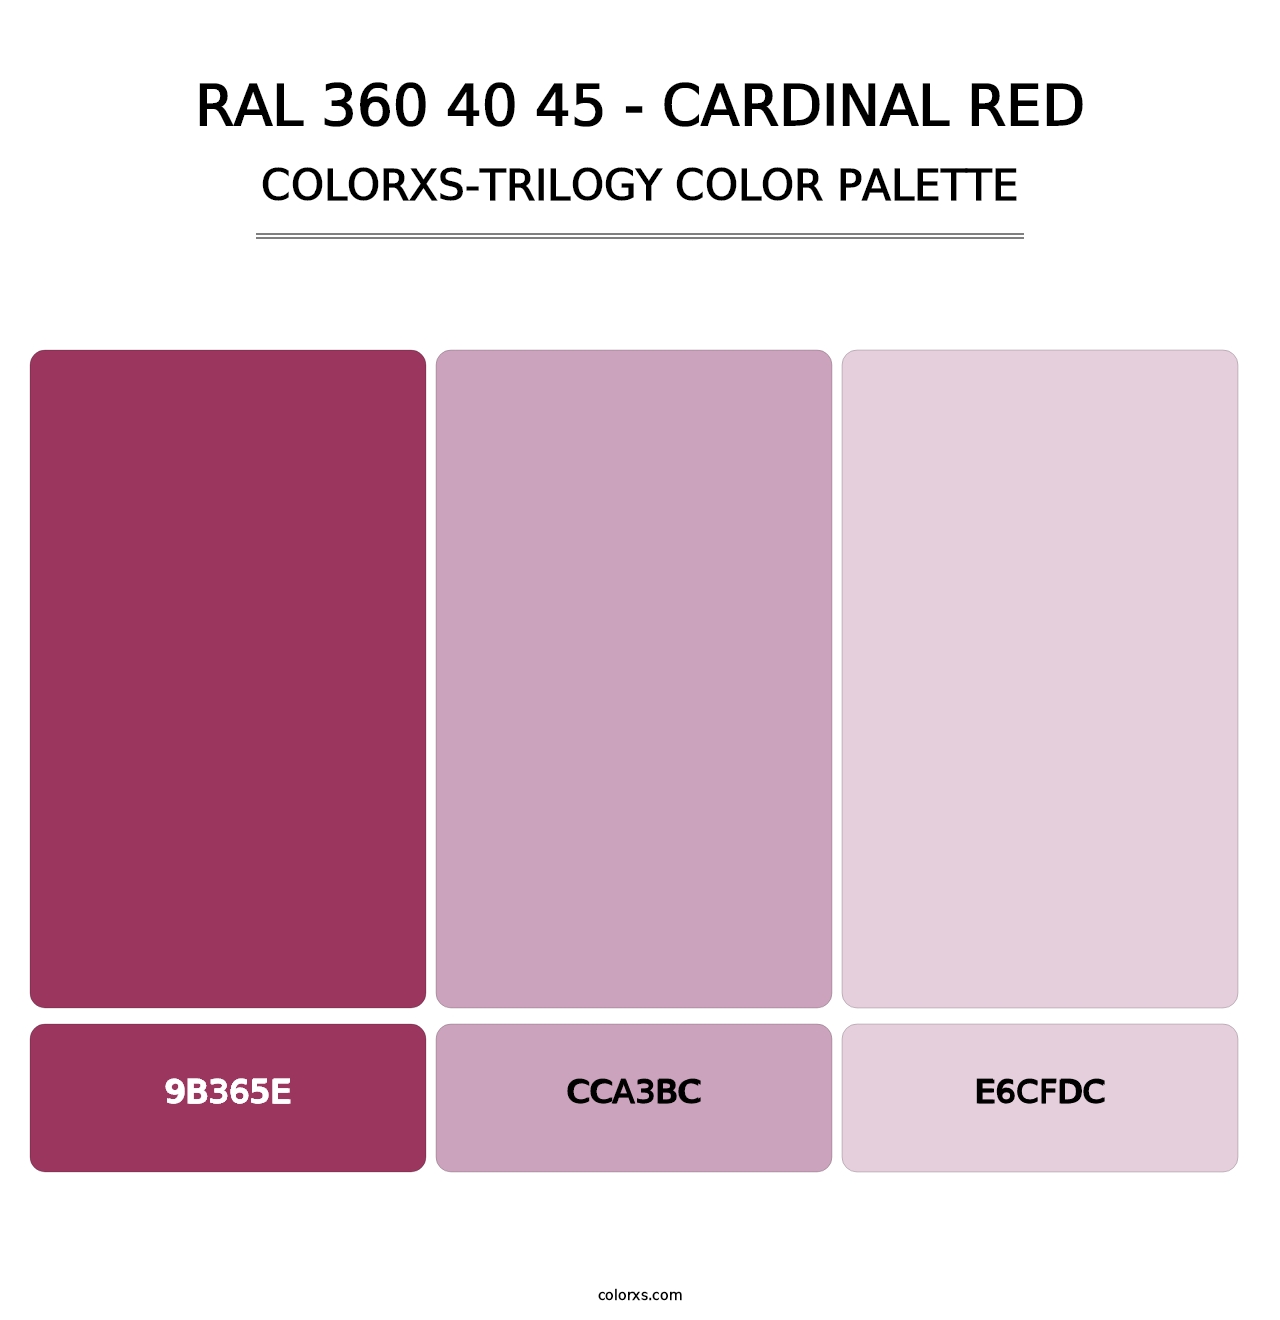 RAL 360 40 45 - Cardinal Red - Colorxs Trilogy Palette